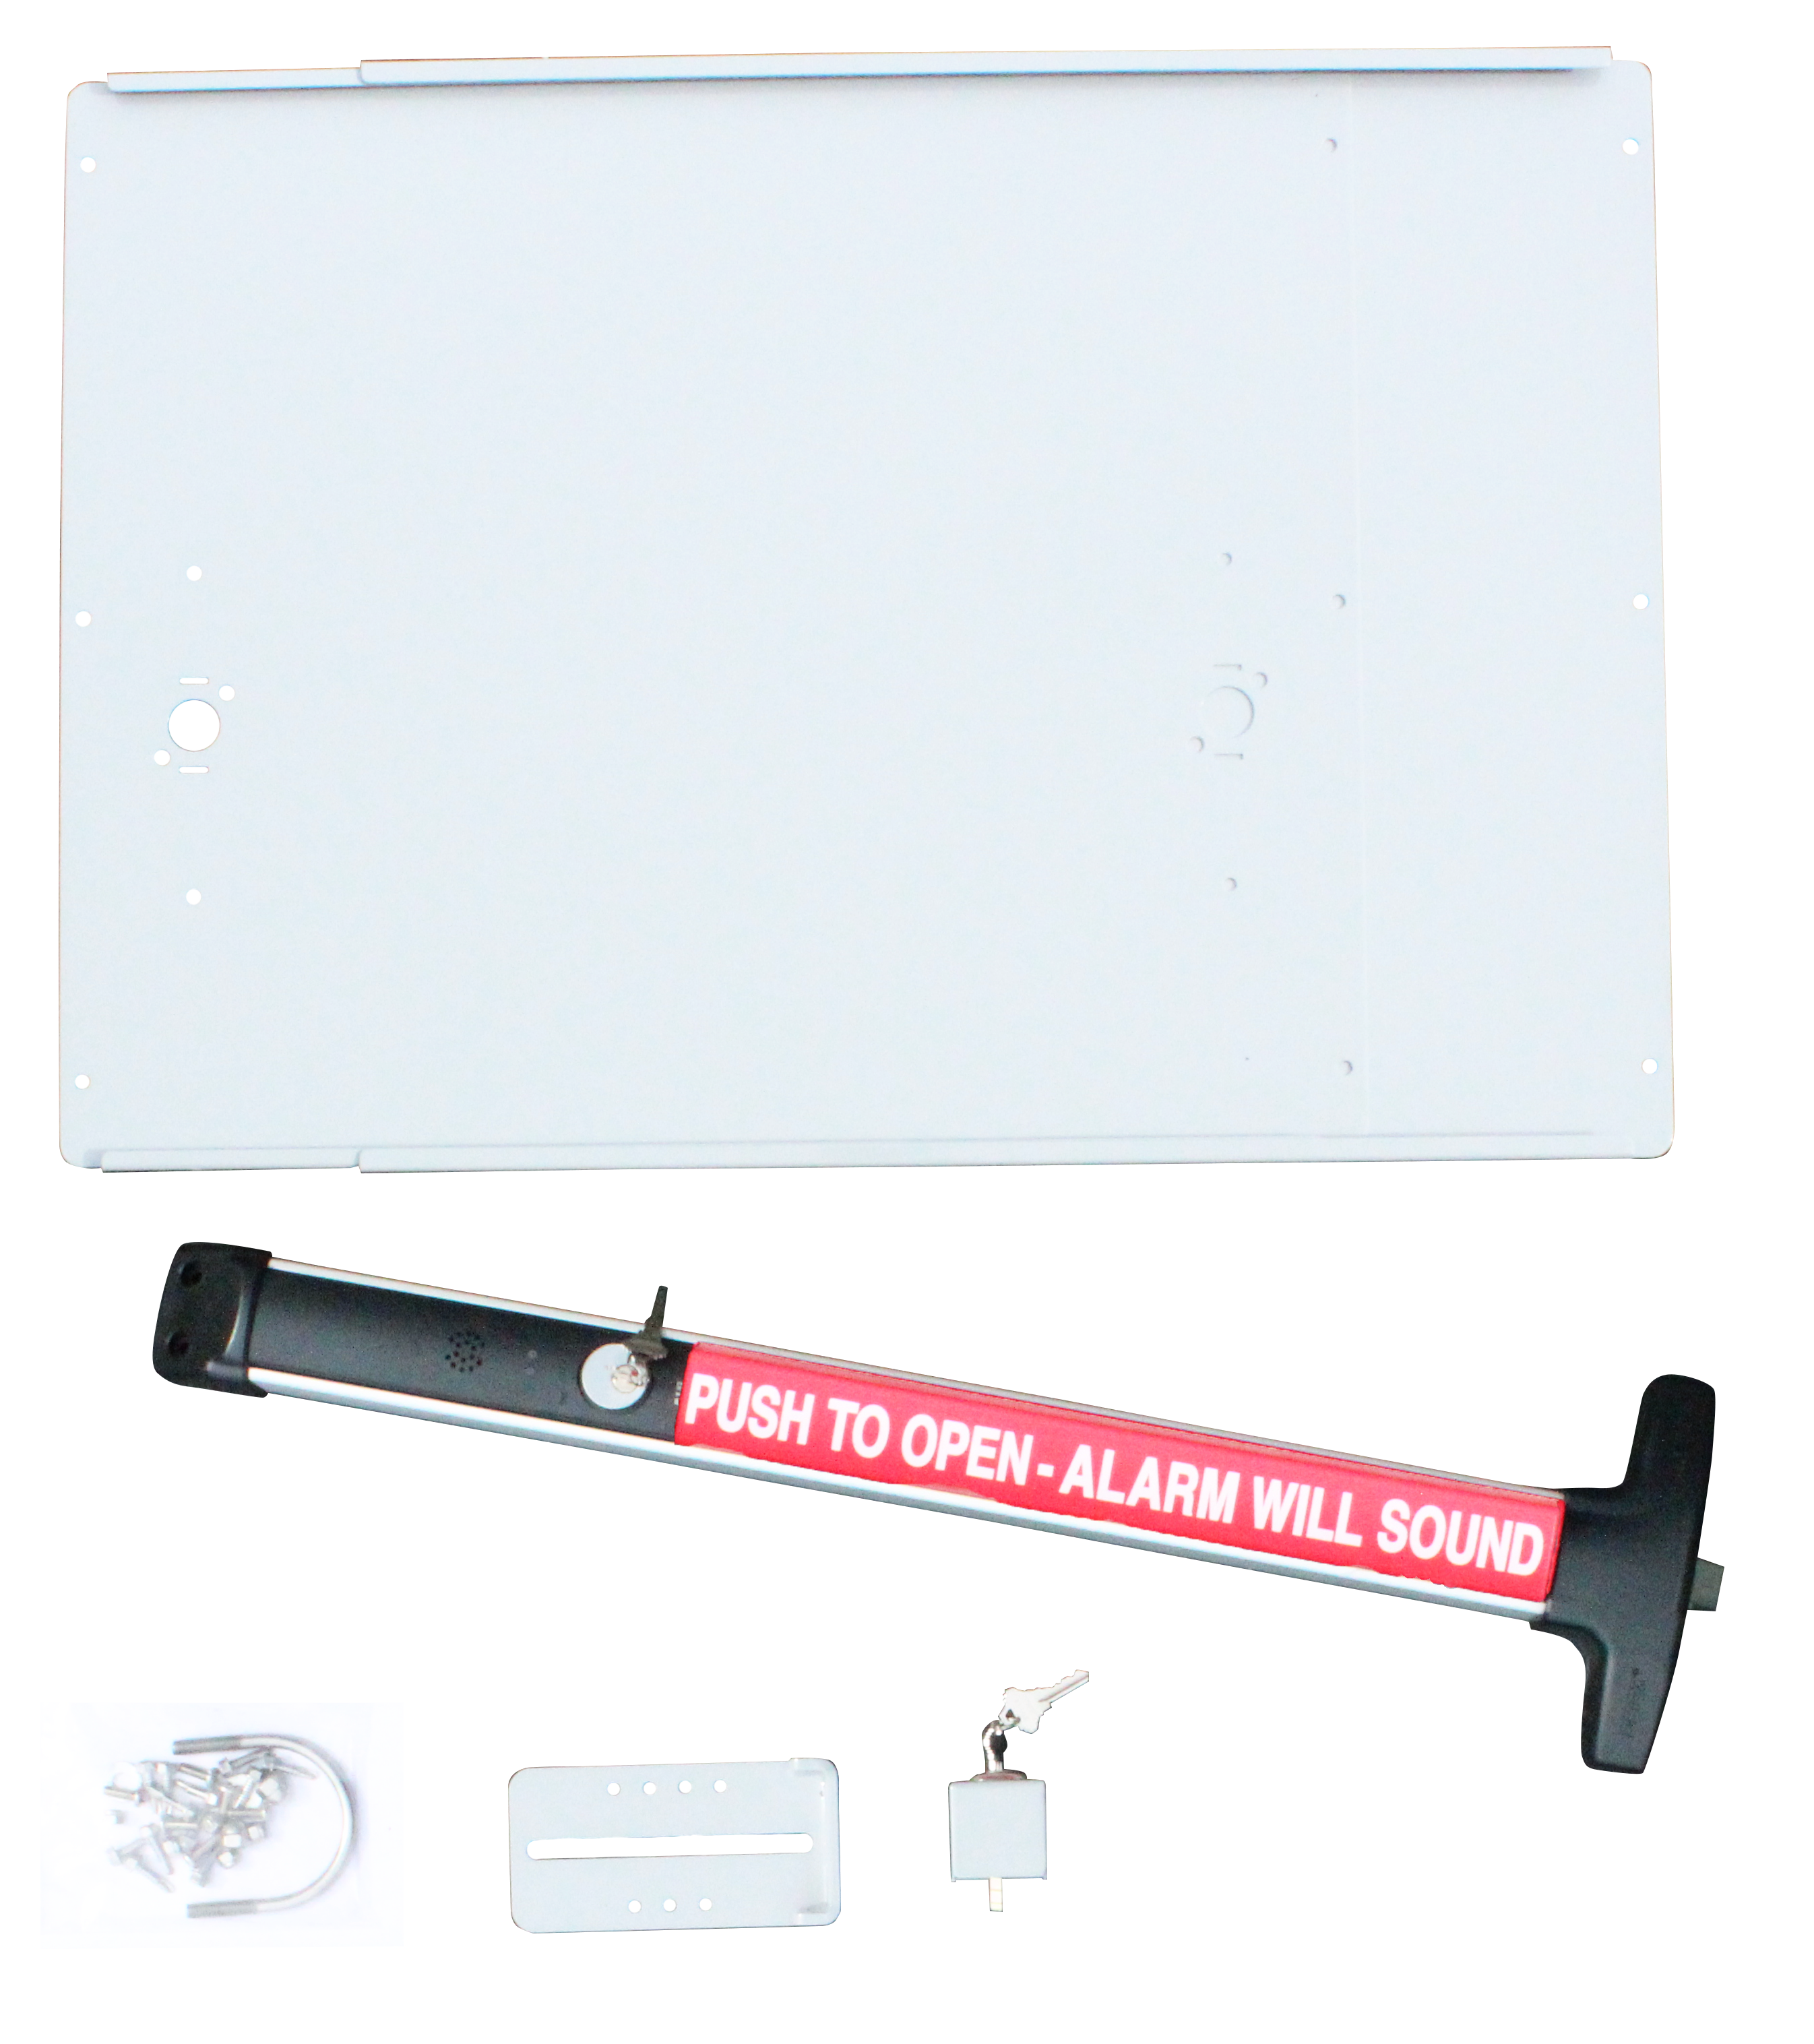 The Detex Exit Bar Kit with Alarm is a designed to be a reliable solution for your panic exit hardware needs.